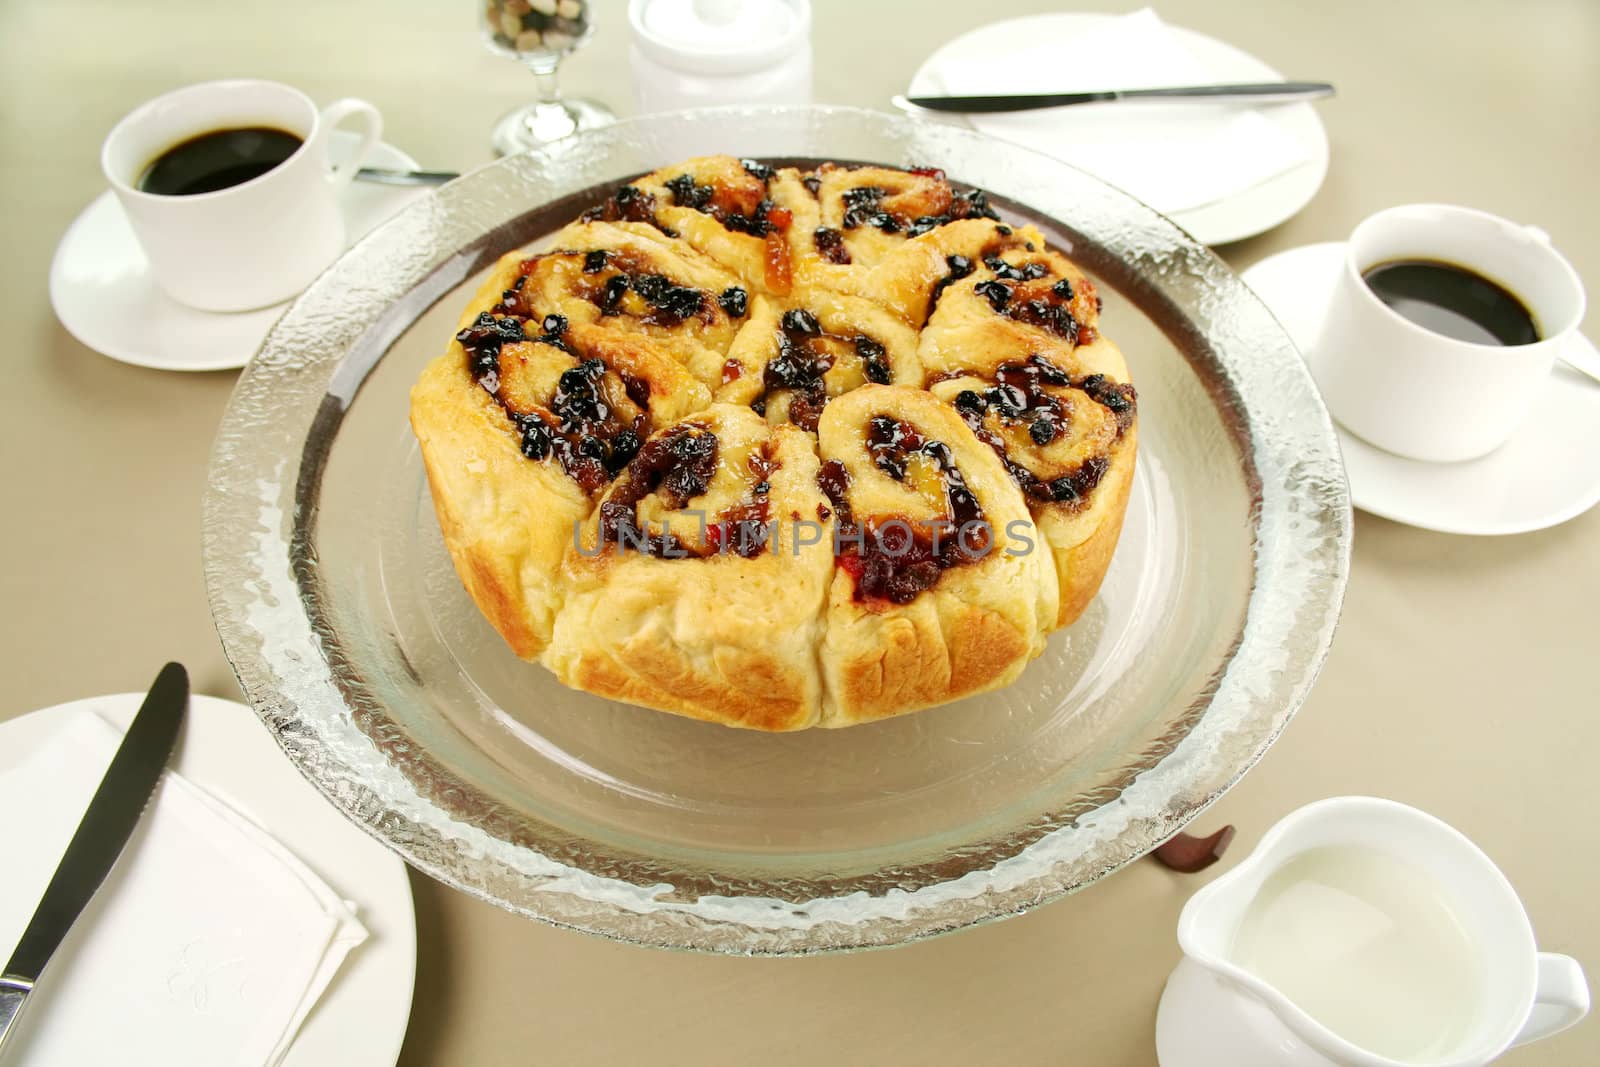 Delicious chelsea bun with dried fruit served with coffee